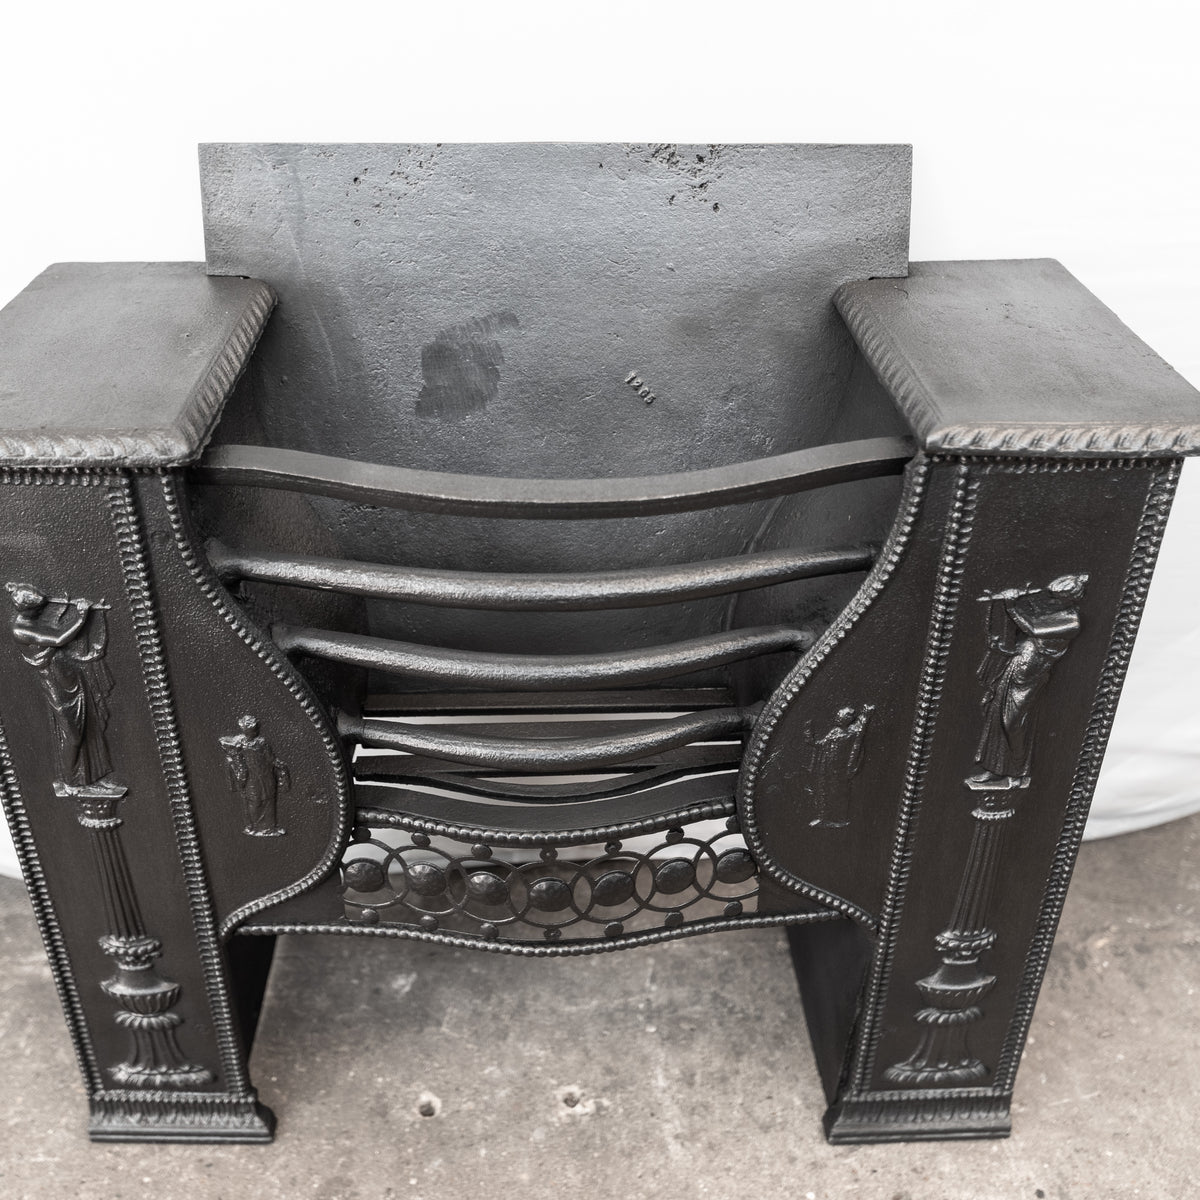 Antique Late Georgian Hob Grate In The Manner of Robert Adam | The Architectural Forum